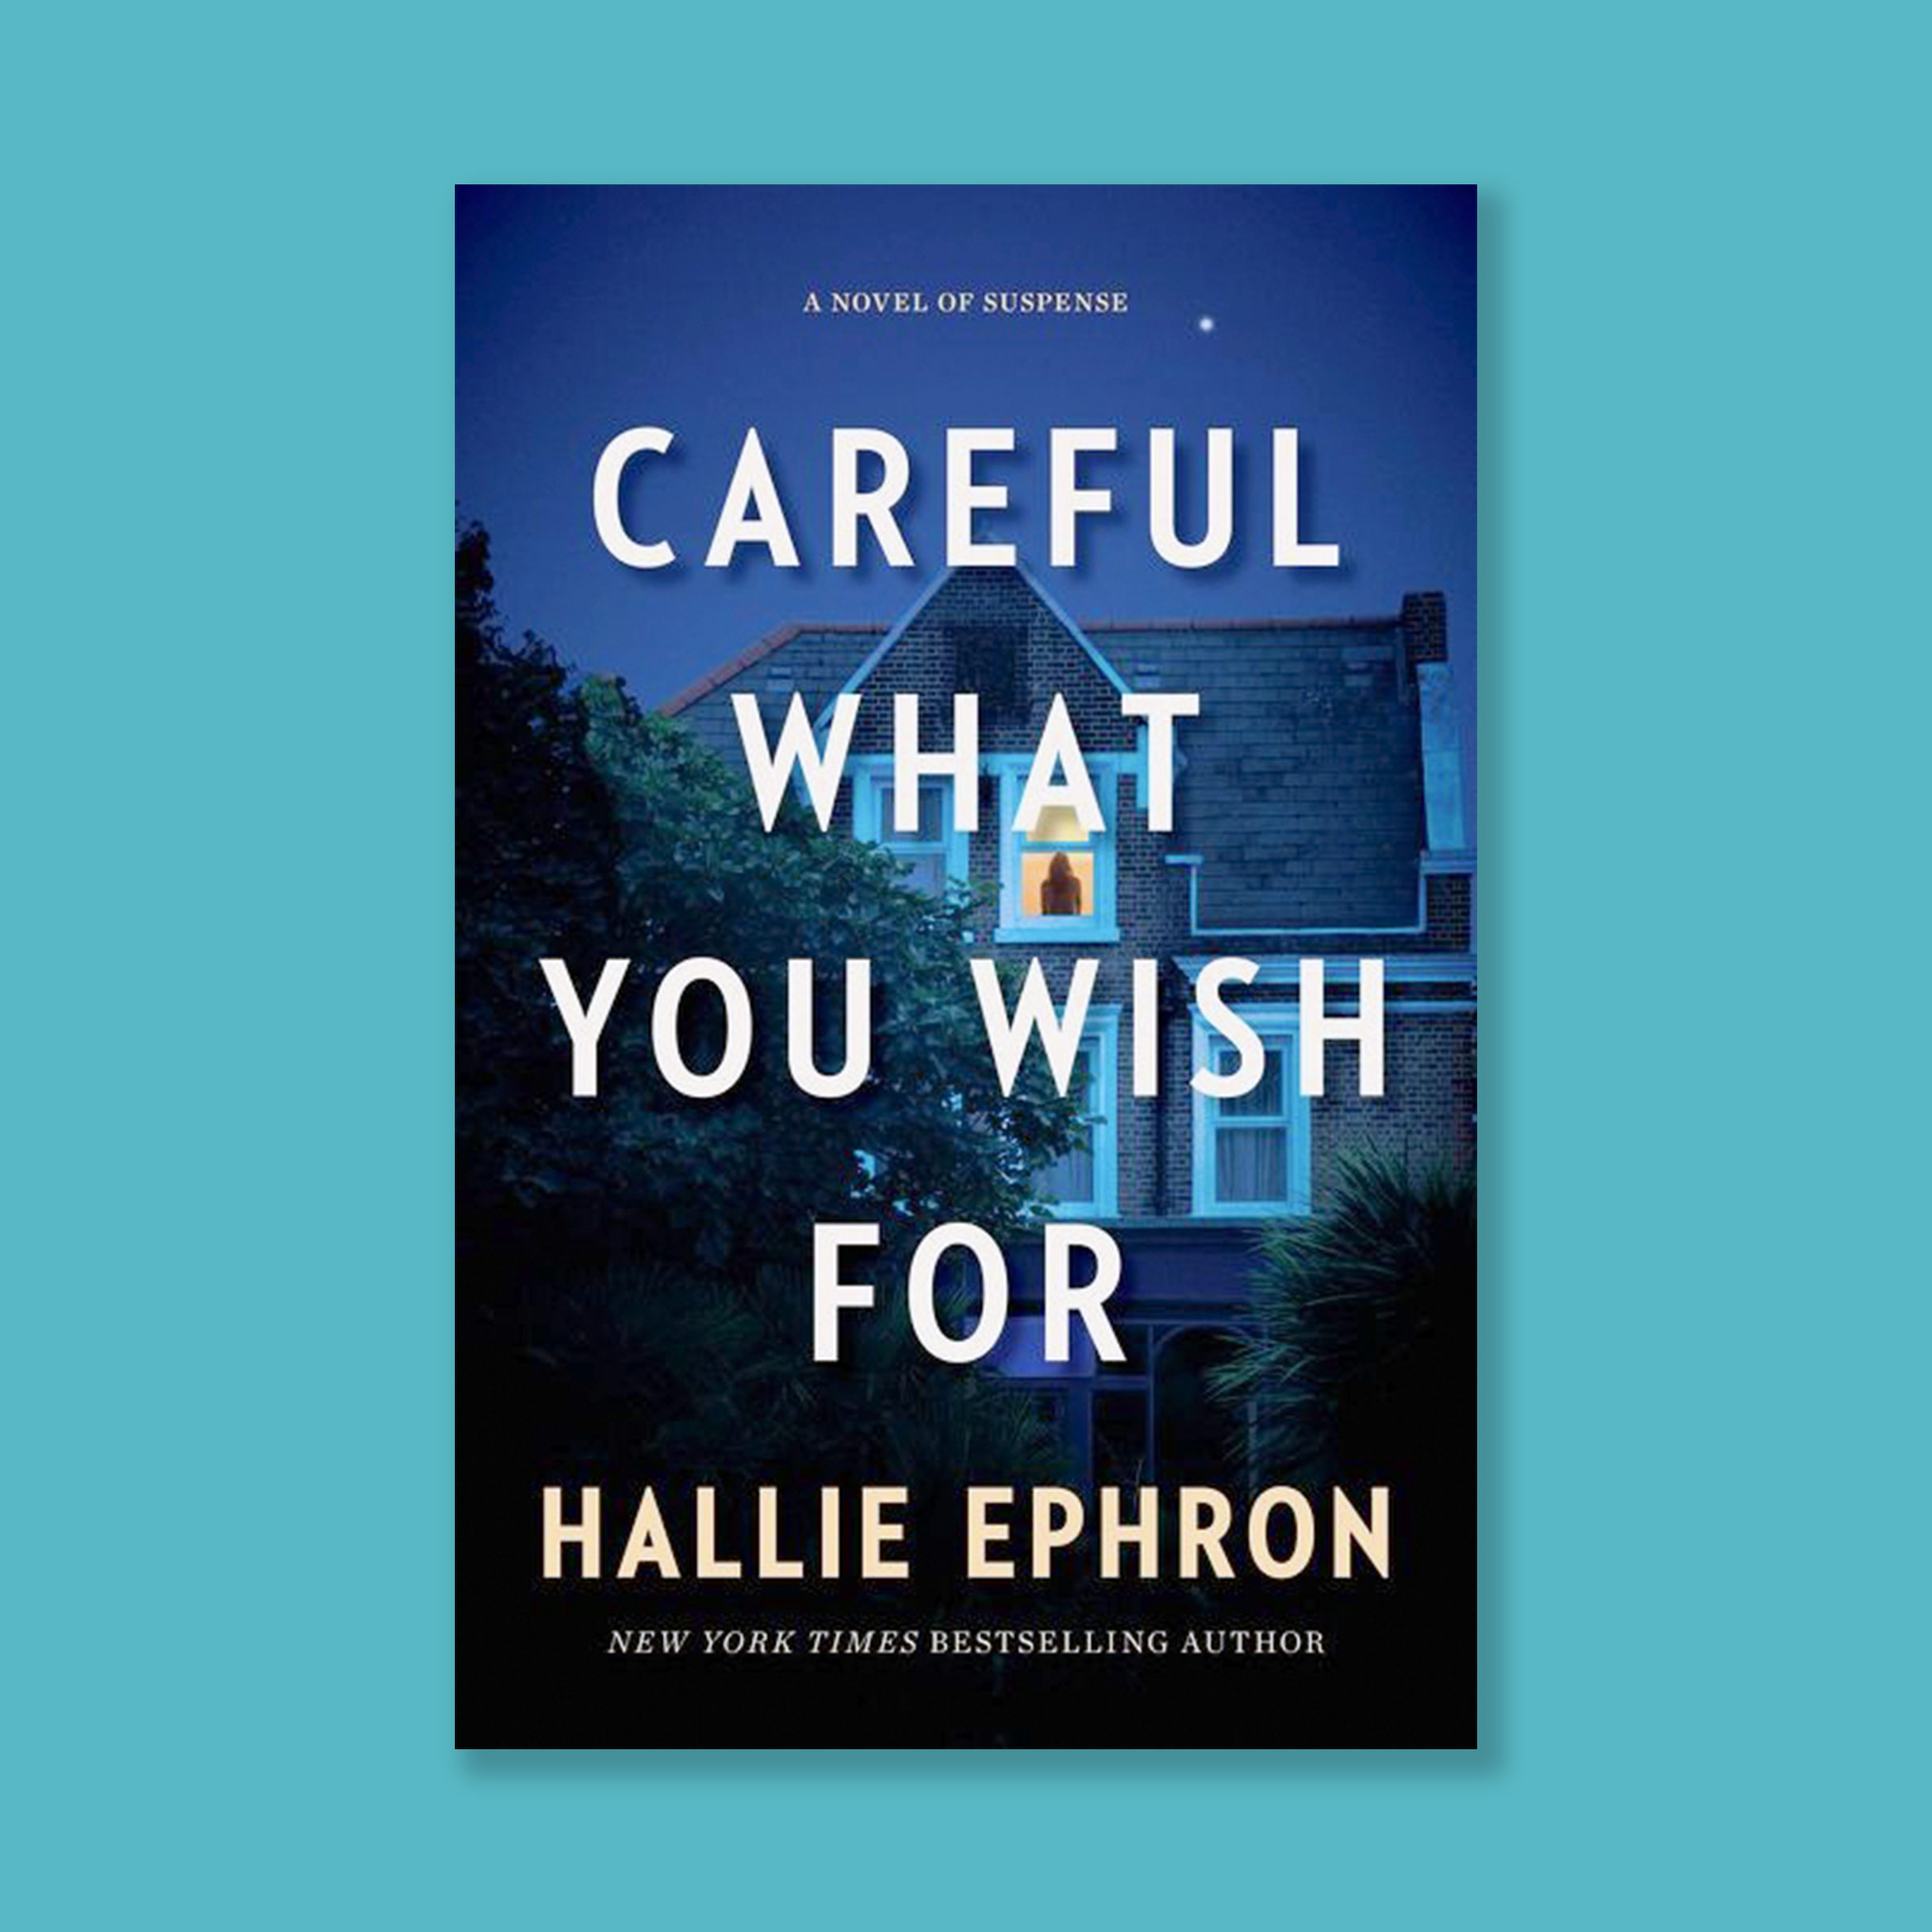 Careful What You Wish For is Ephron’s seventh work of stand-alone suspense fiction.